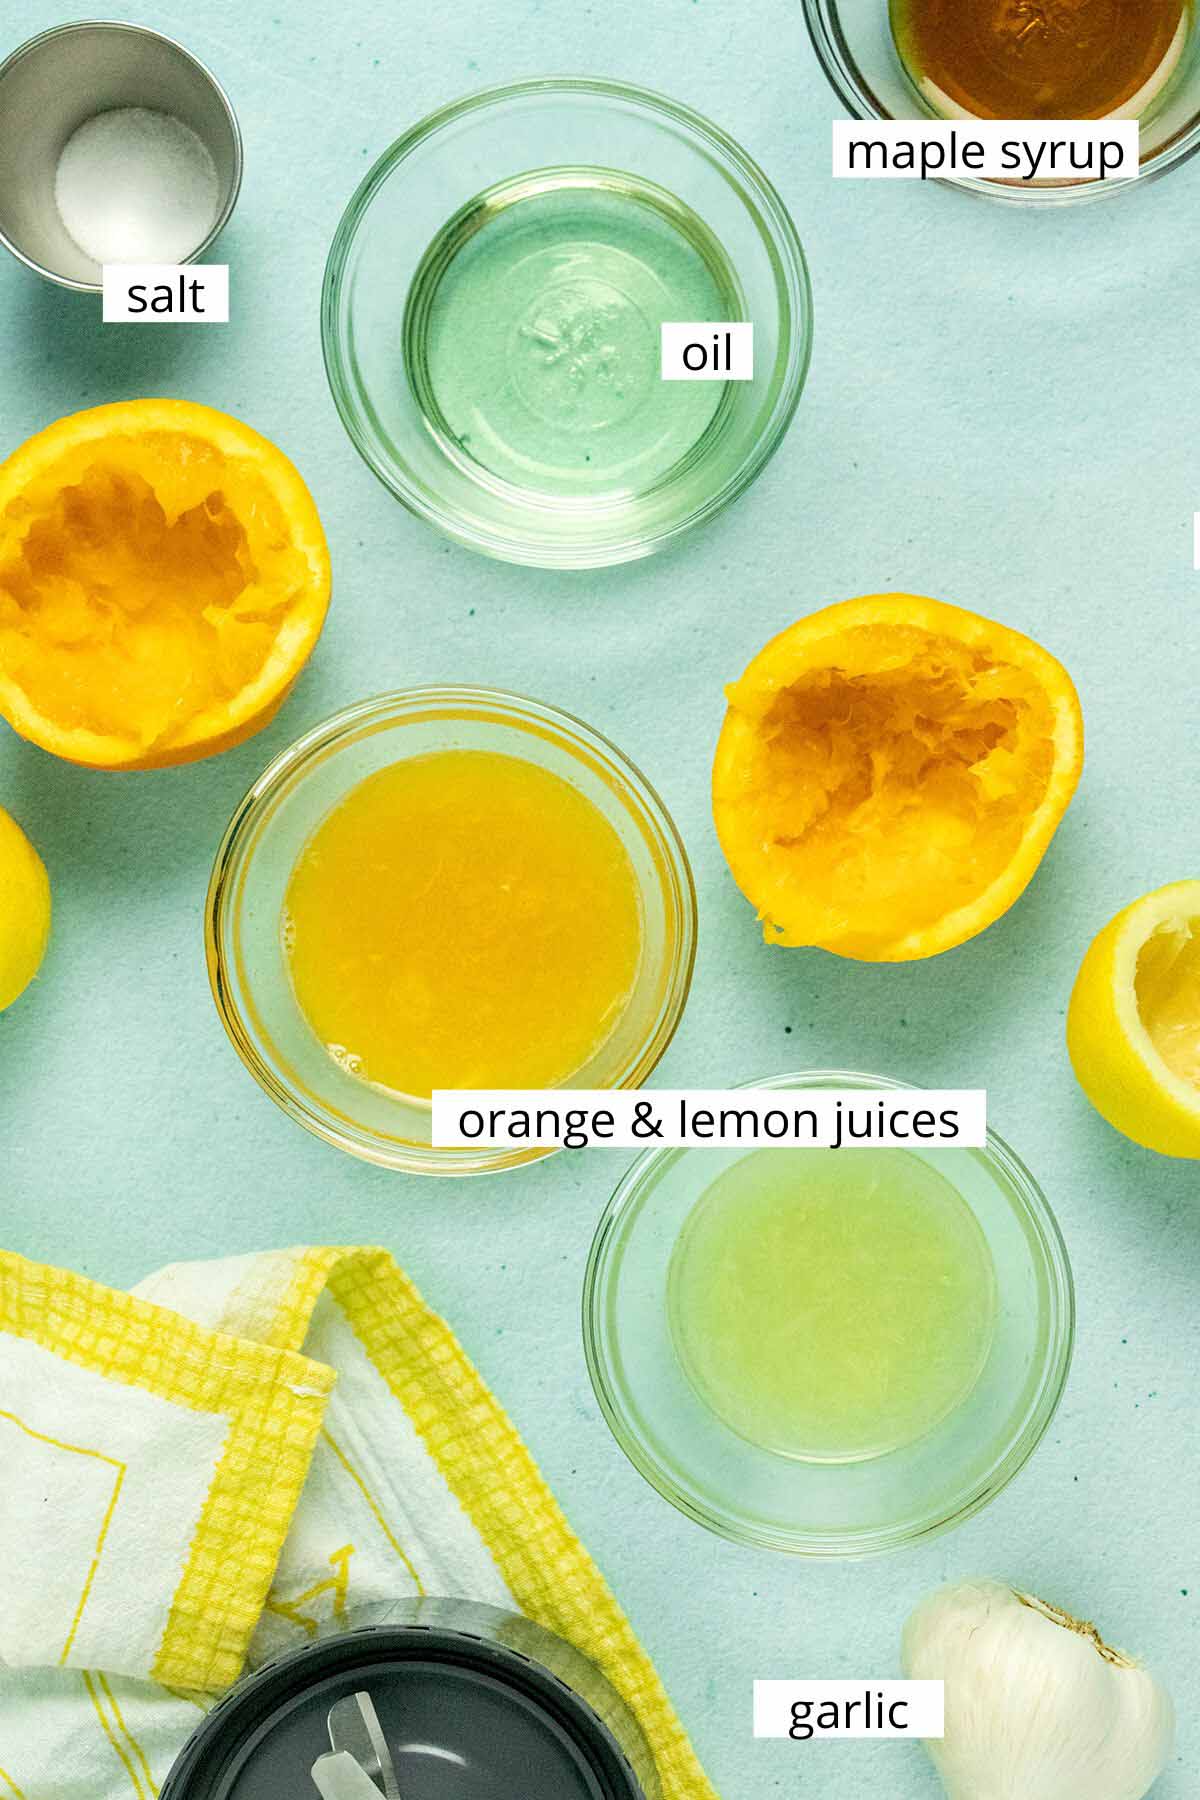 citrus juices, oil, maple syrup, salt, and garlic on a light blue table with text labels on each ingredient